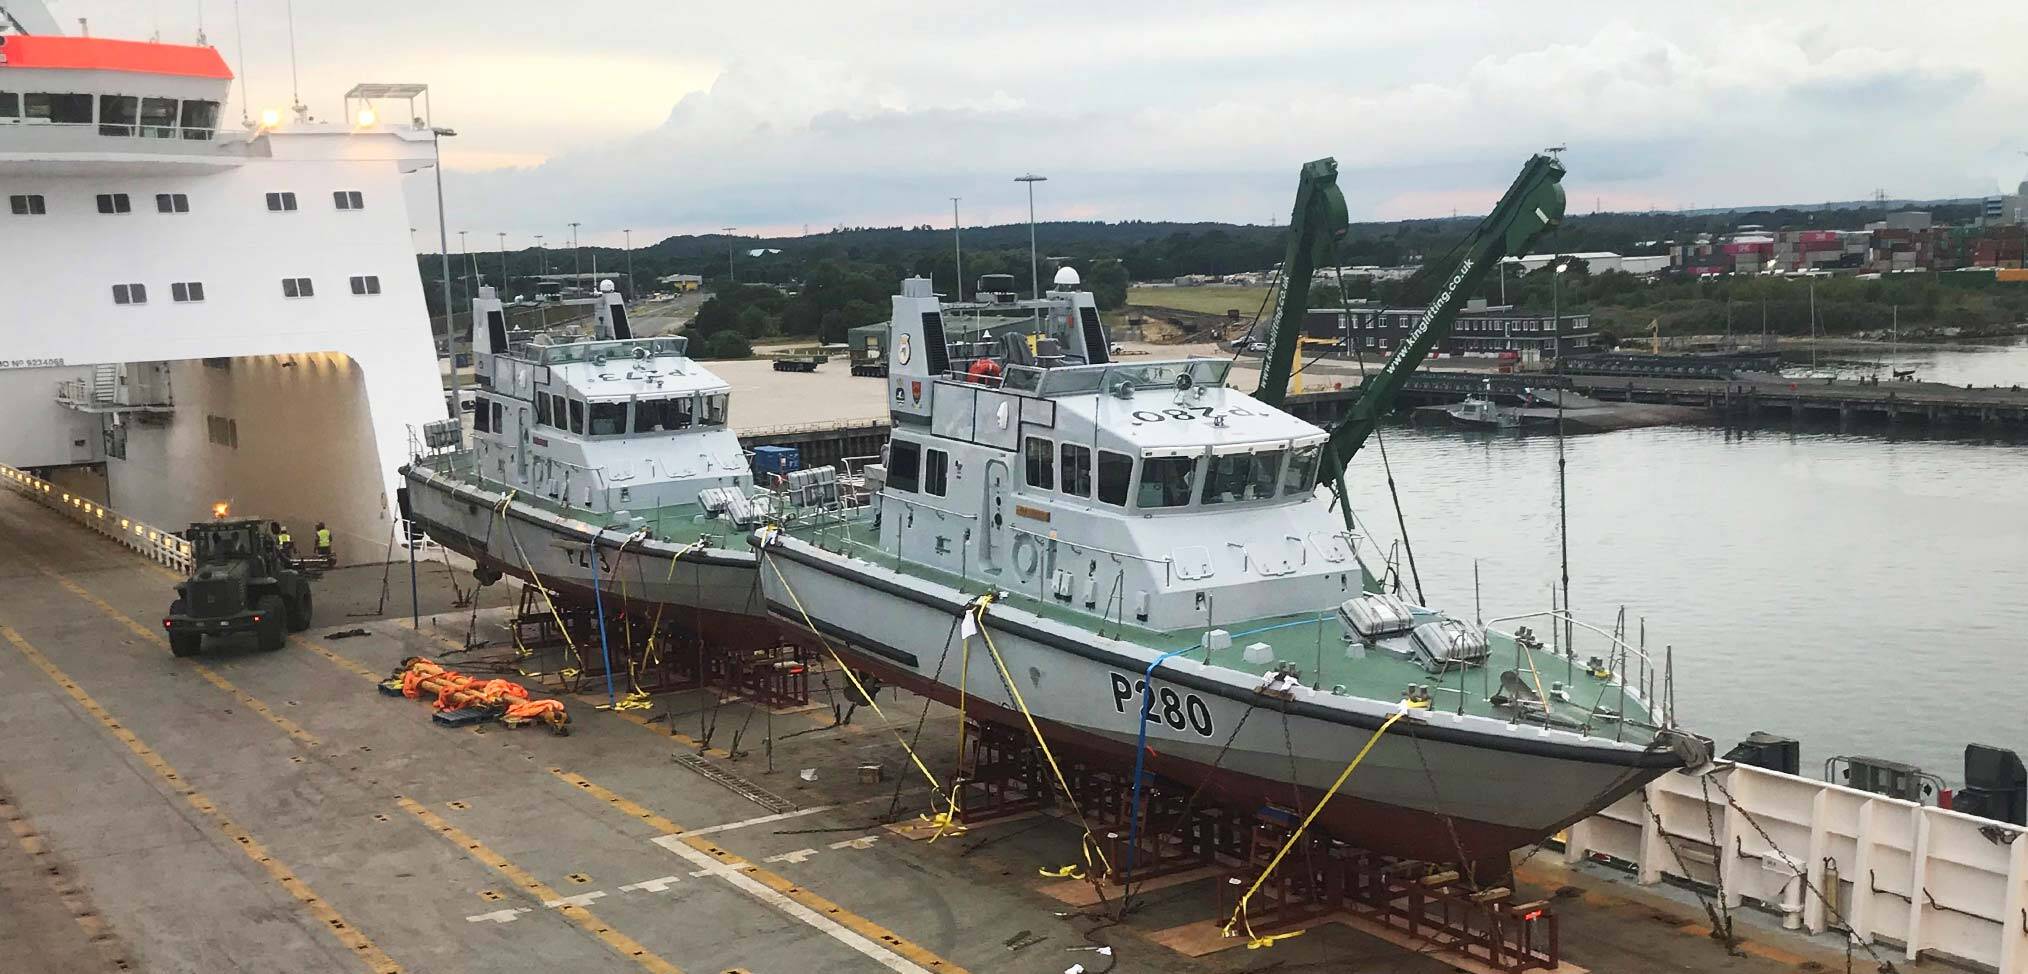 Patrol boats for the Royal Navy Gibraltar Squadron